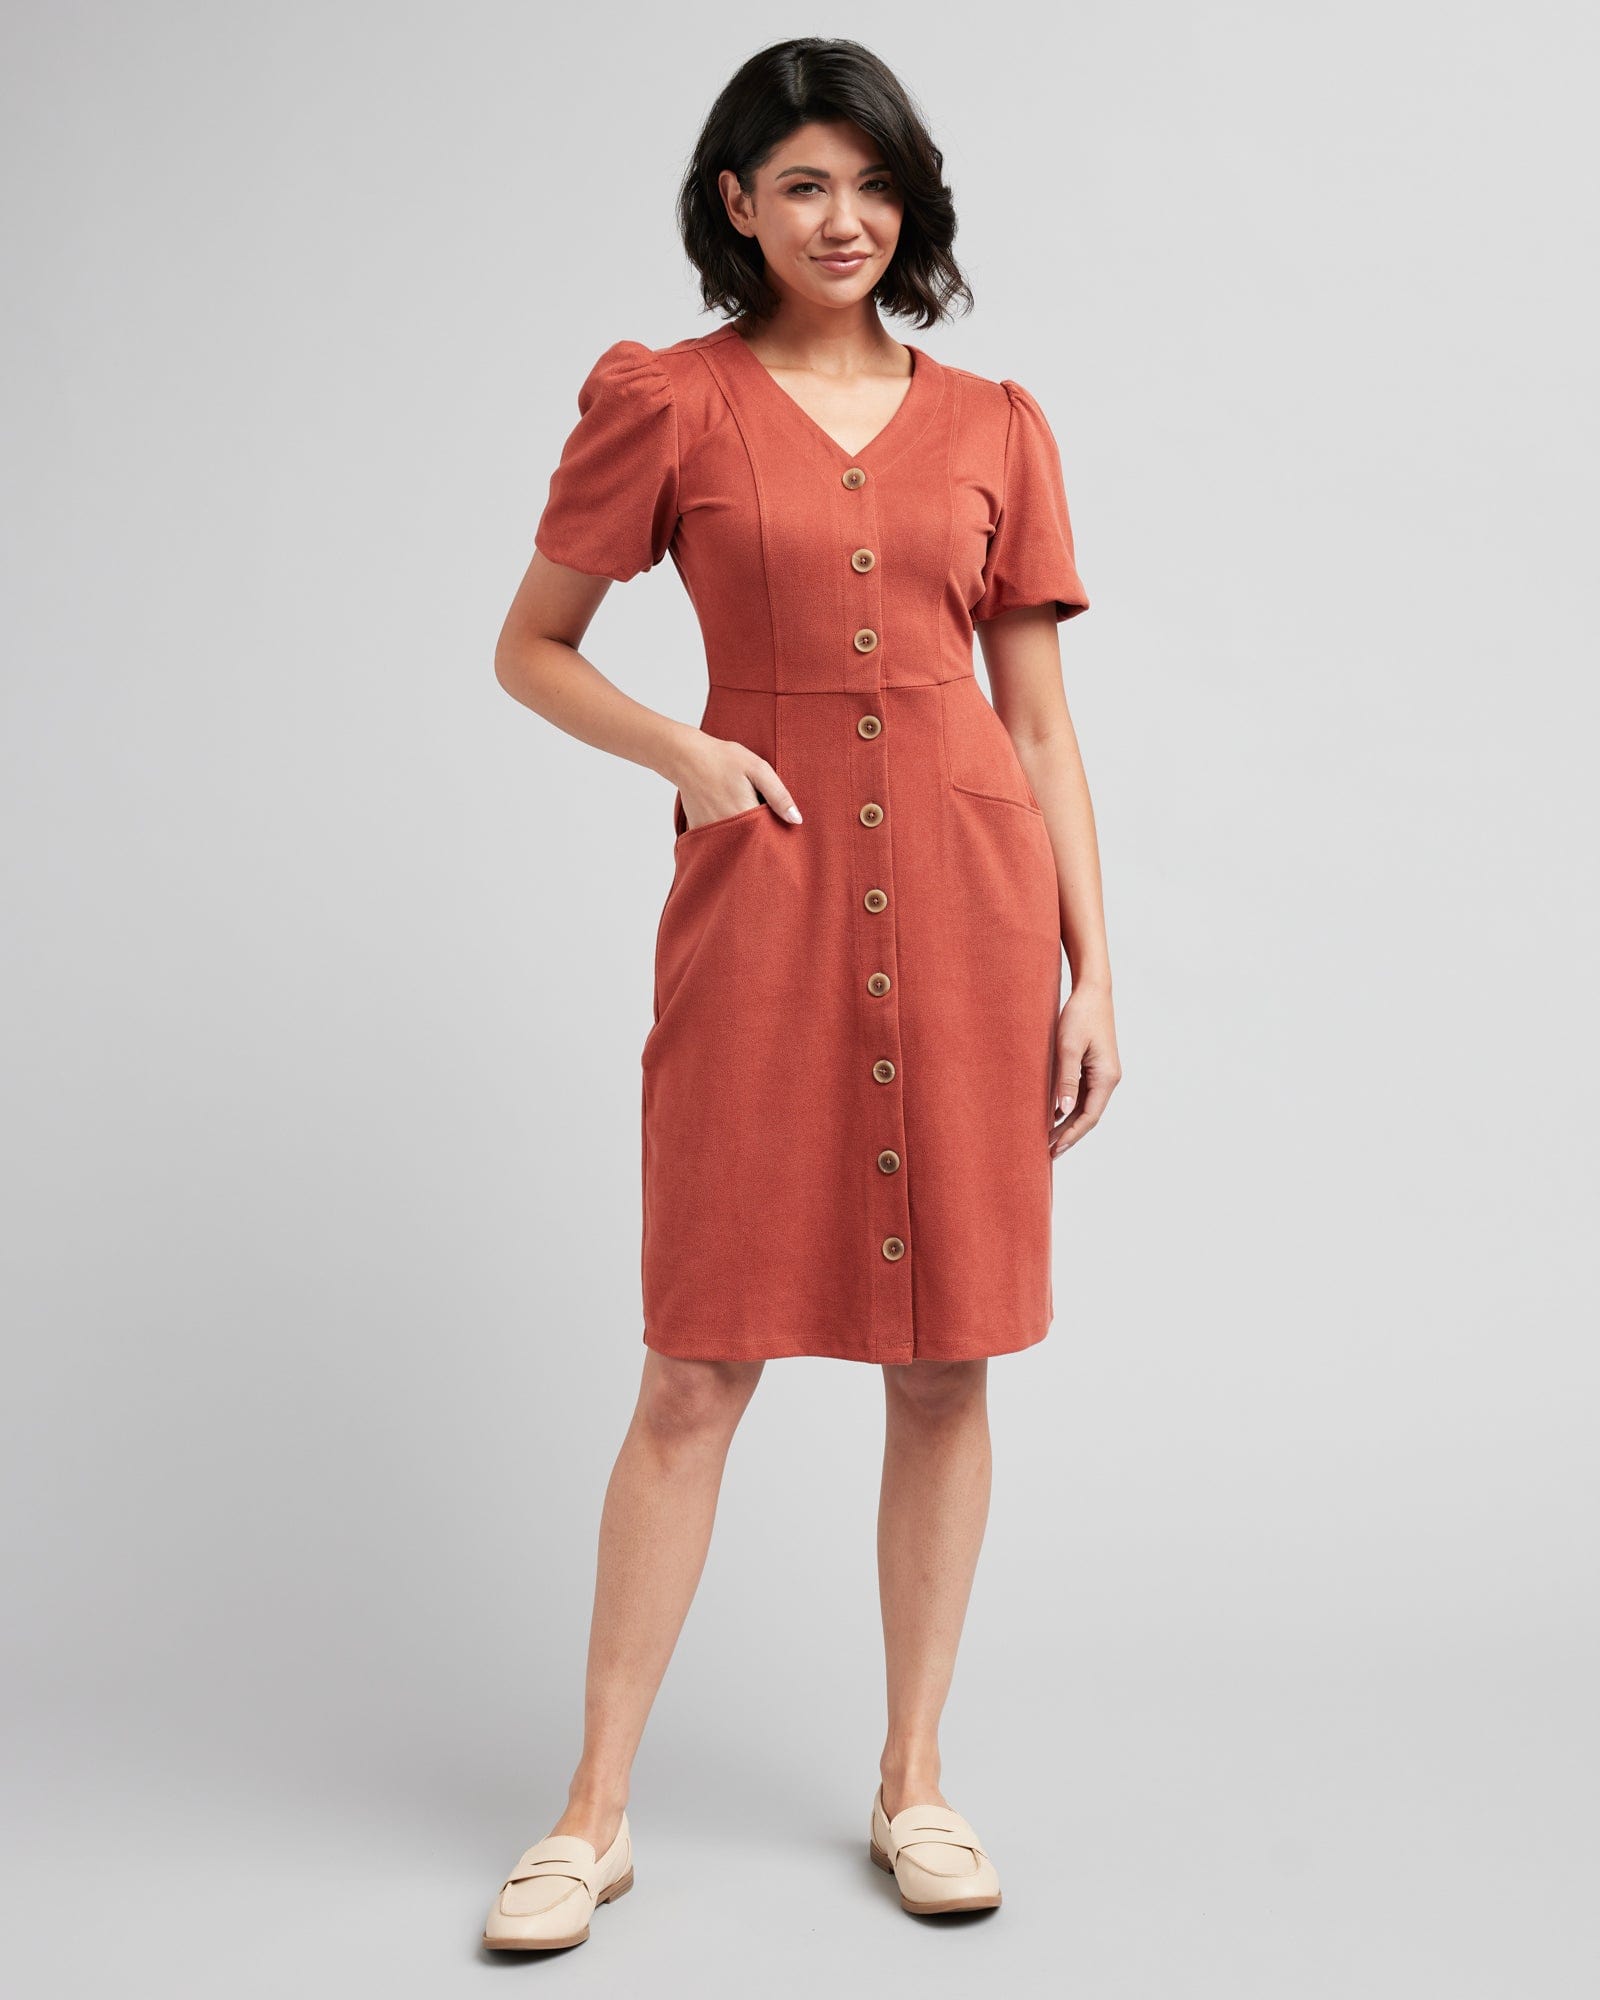 Woman in a short sleeve, v-neck, button-down, orange dress